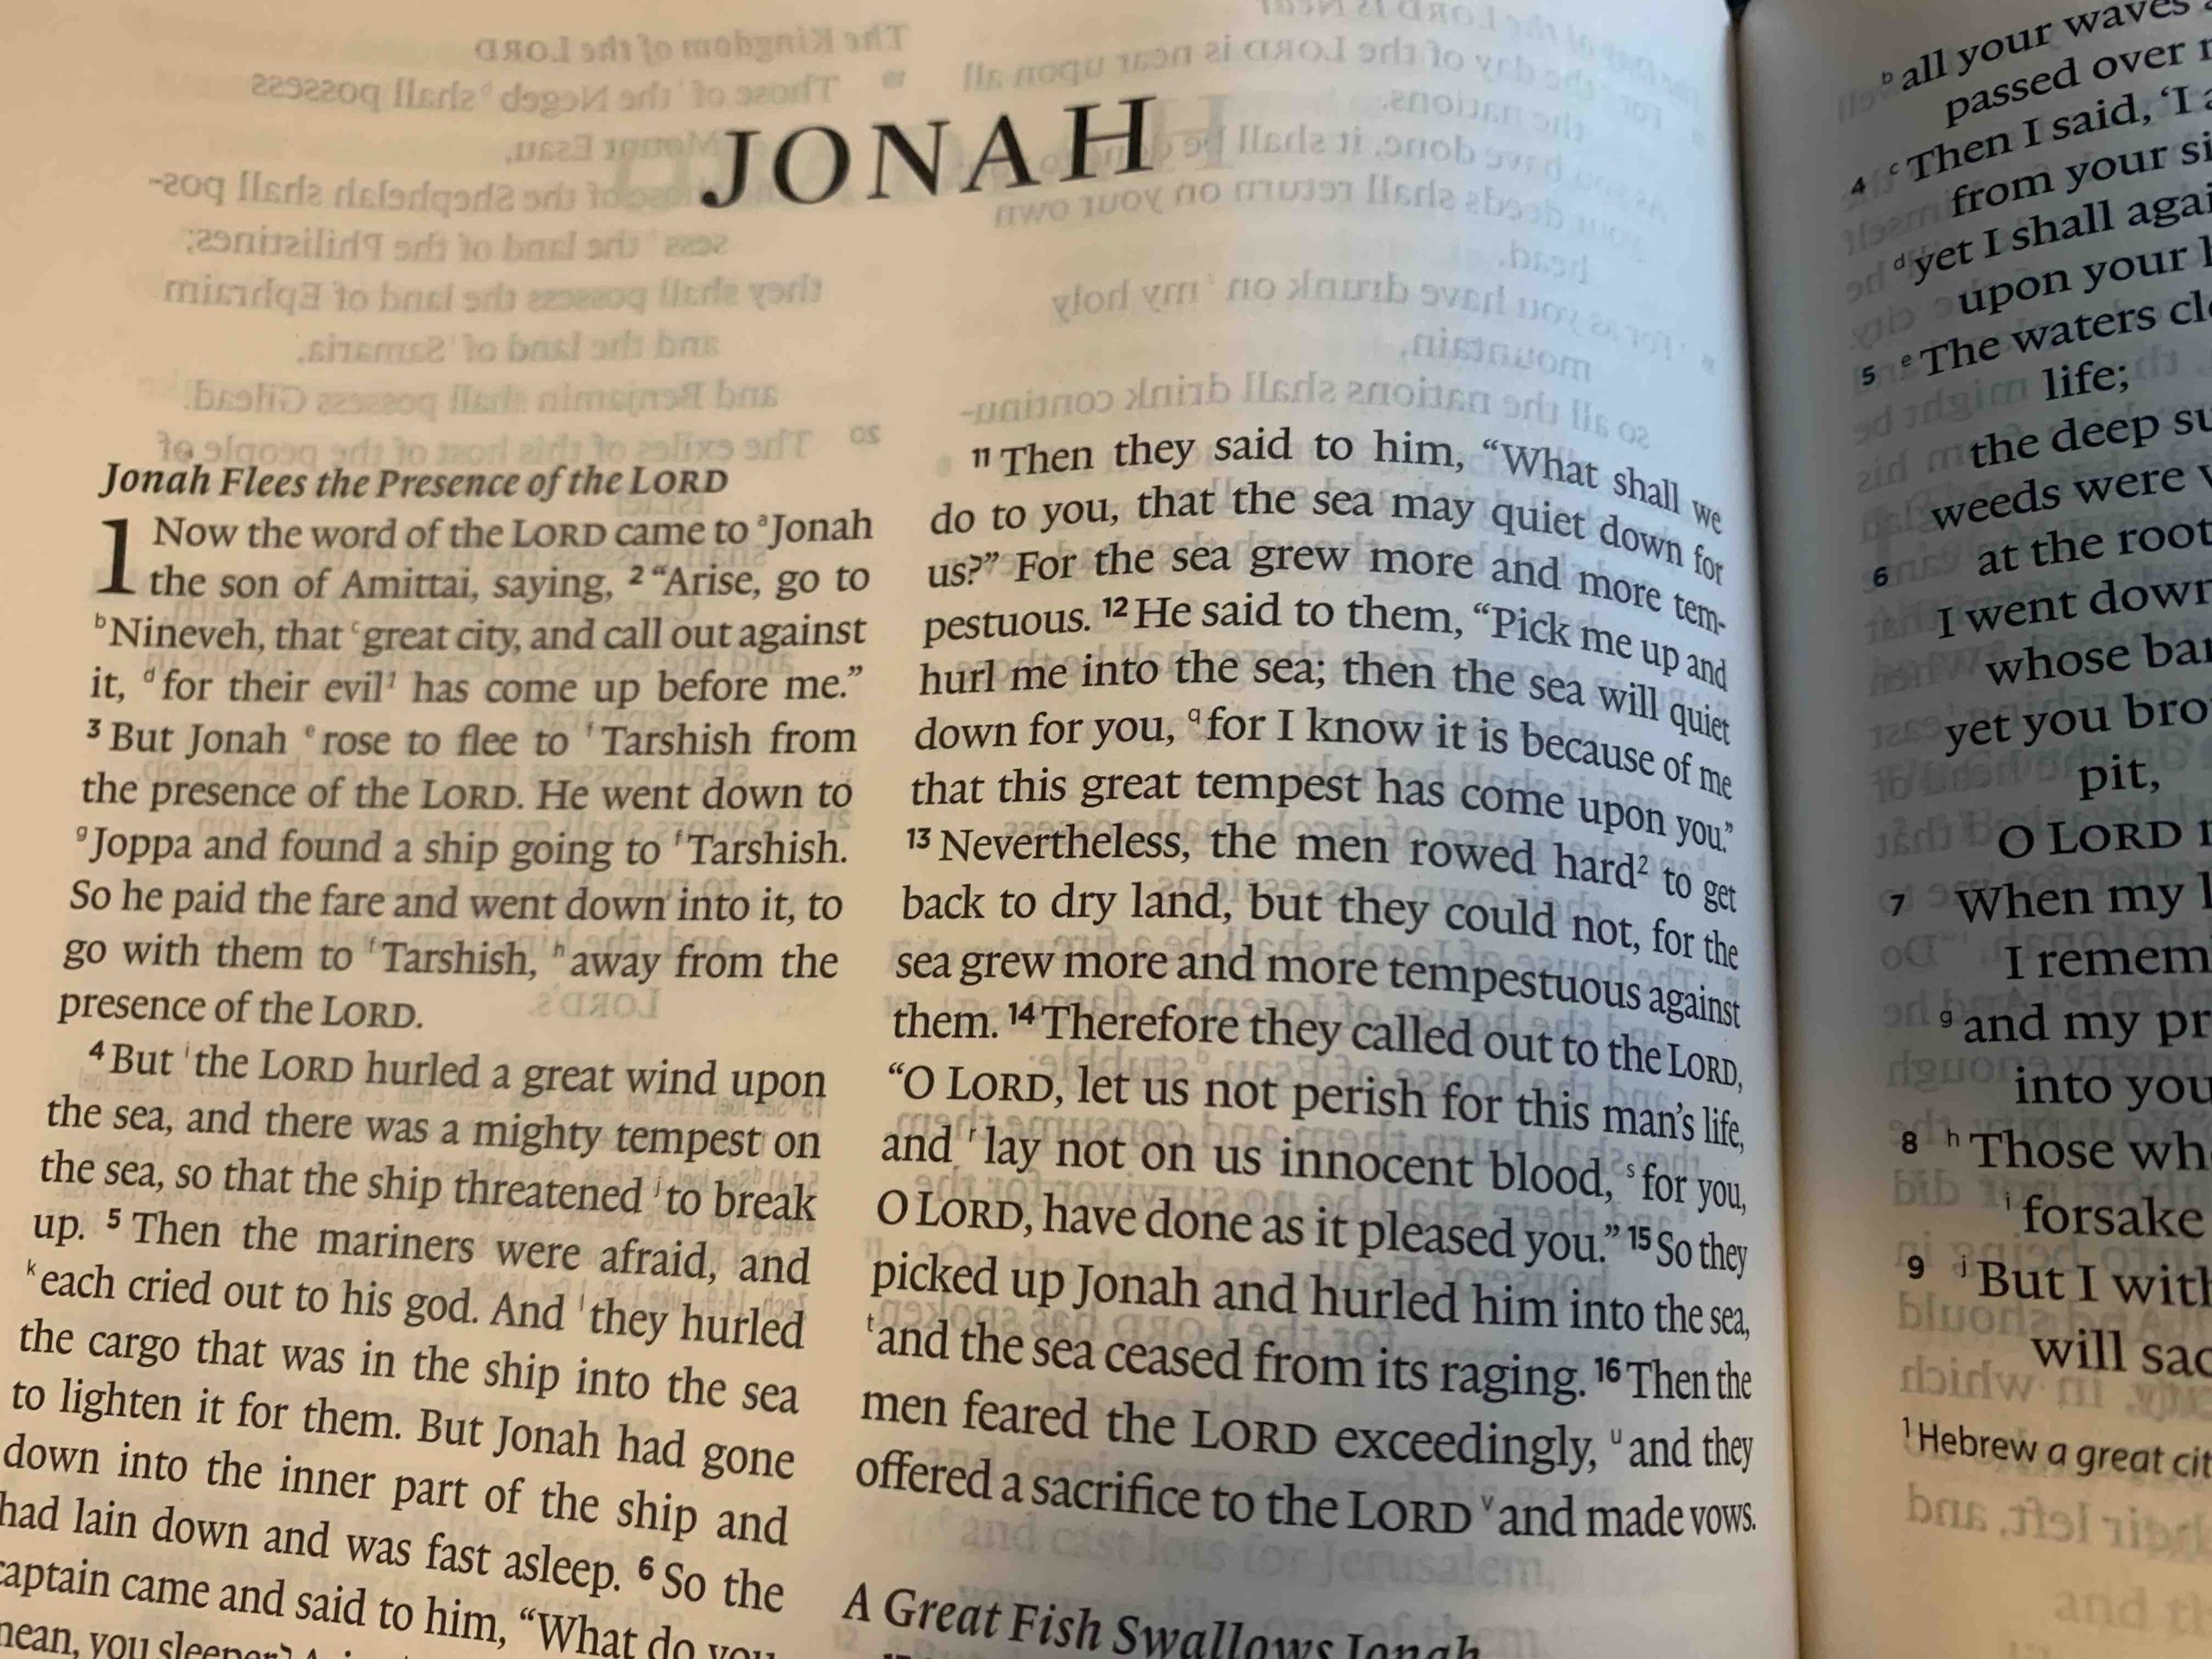 Jonah 1:7-10  “Why Is This Happening?”